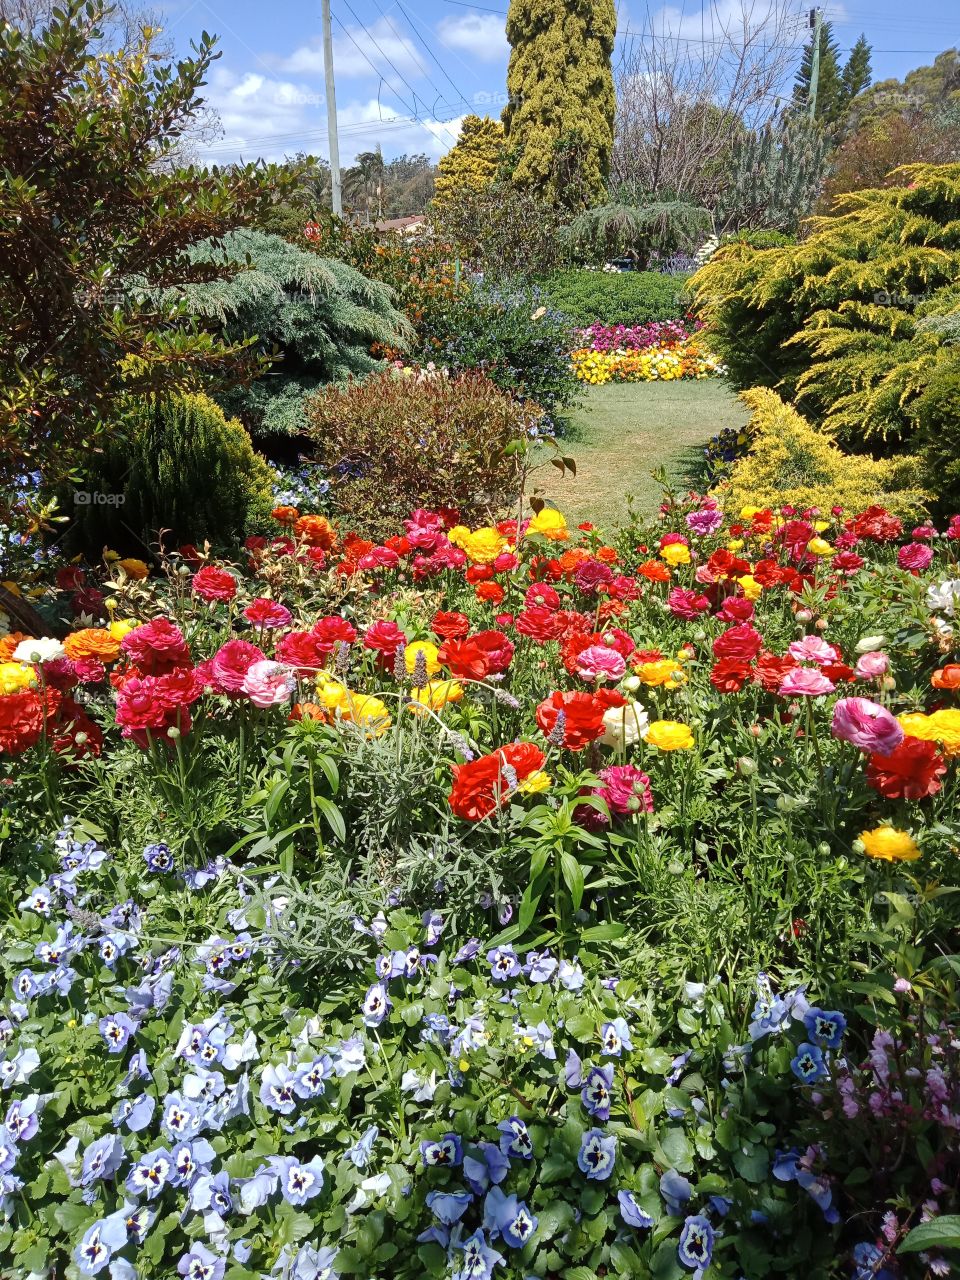 A garden with lots of flowers